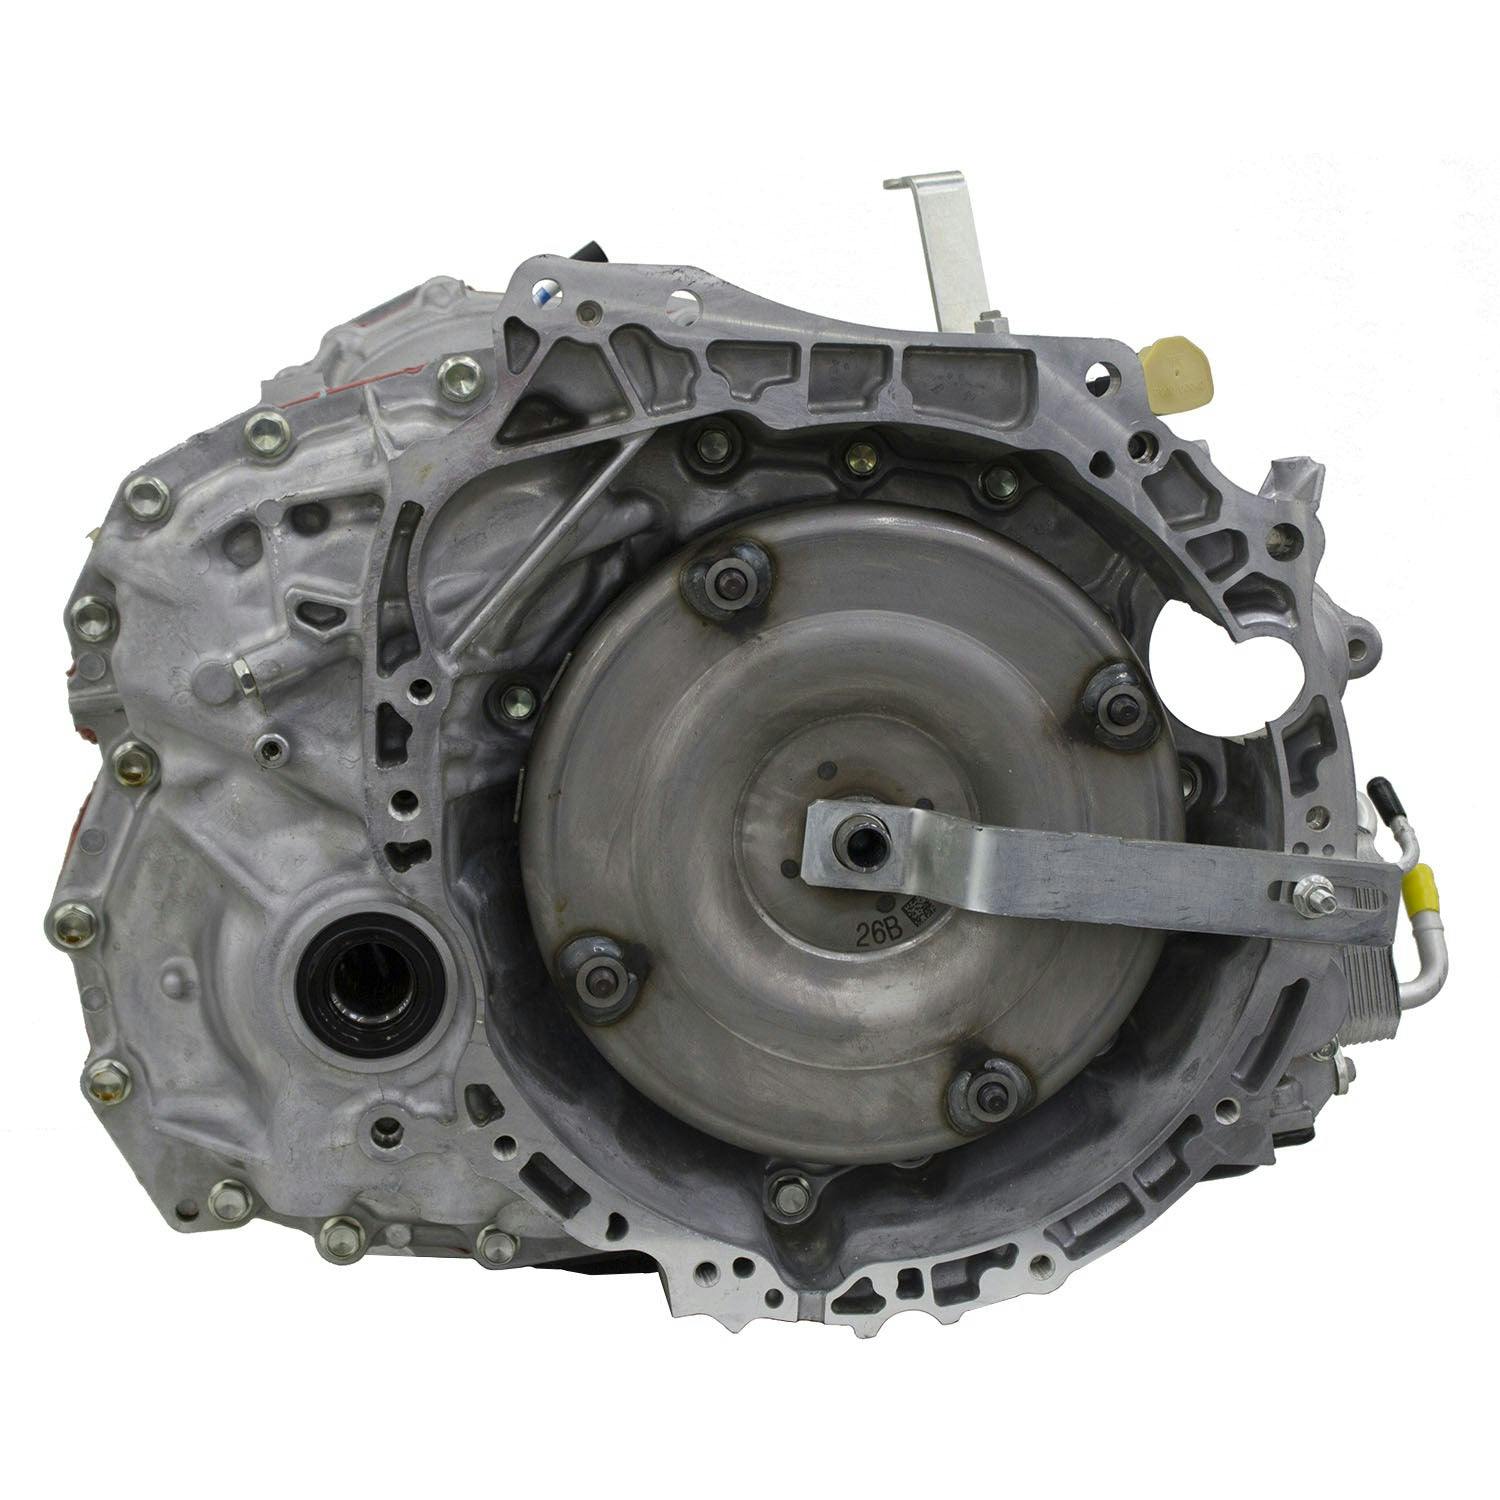 Automatic Transmission for 2009-2012 Nissan Sentra FWD with 2.5L Inline-4 Engine